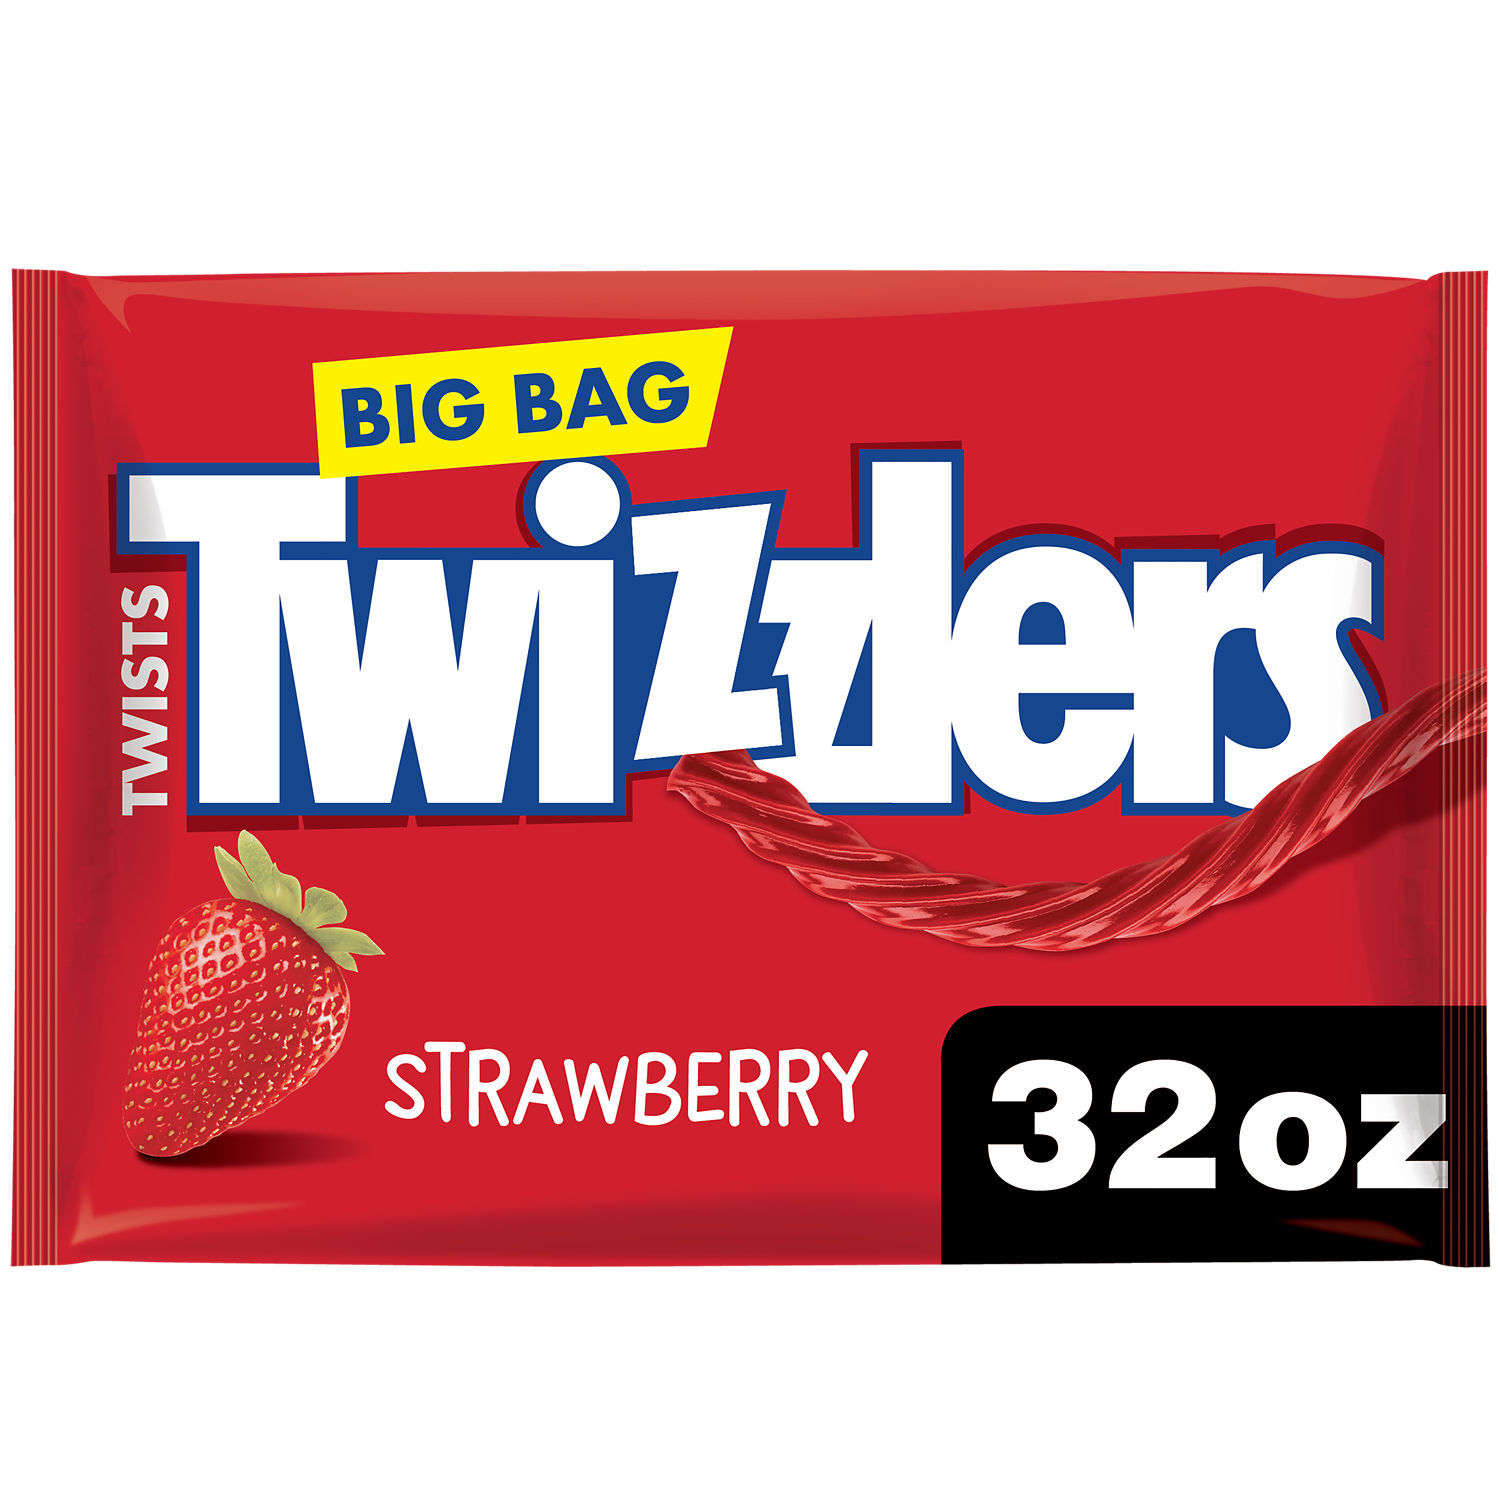 Twizzlers Twists Strawberry Flavored Licorice Style Low Fat Candy, Big Bag 32 oz - image 1 of 9